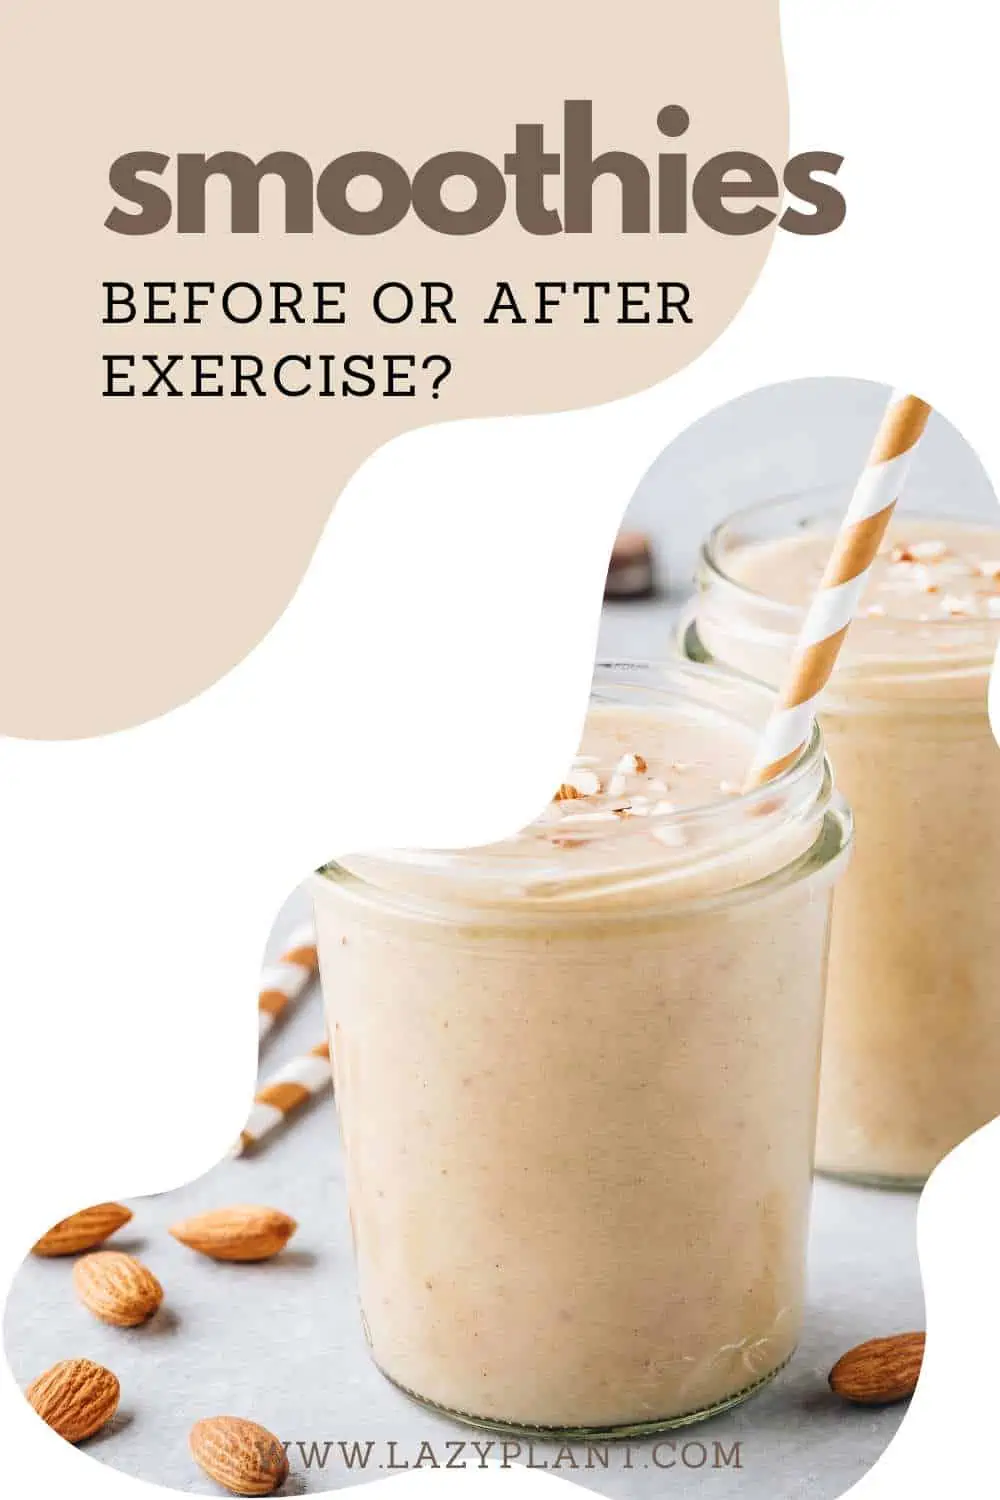 Before or after a workout should an athlete drink a protein smoothie?